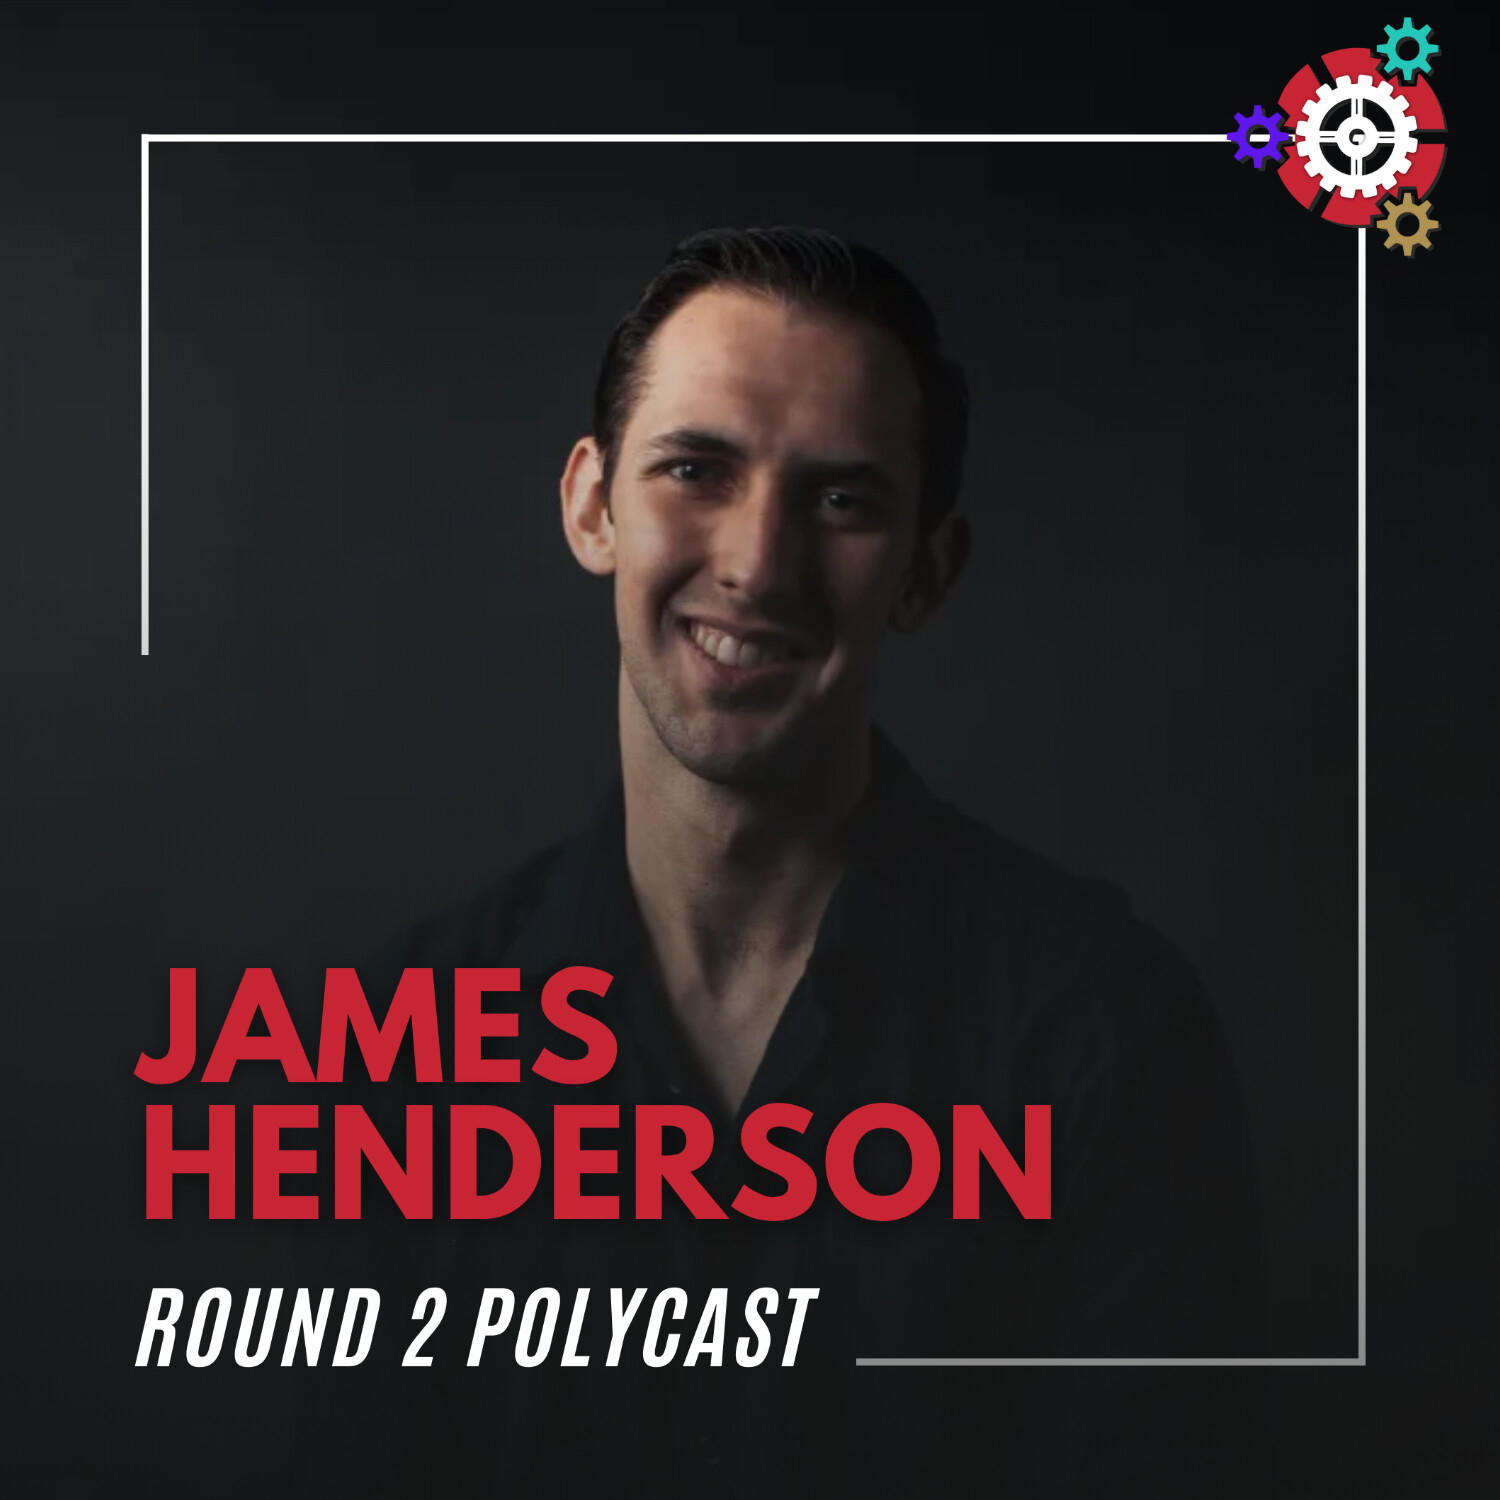 Exploring DEEP Concepts with James Henderson #Round2PolyCast